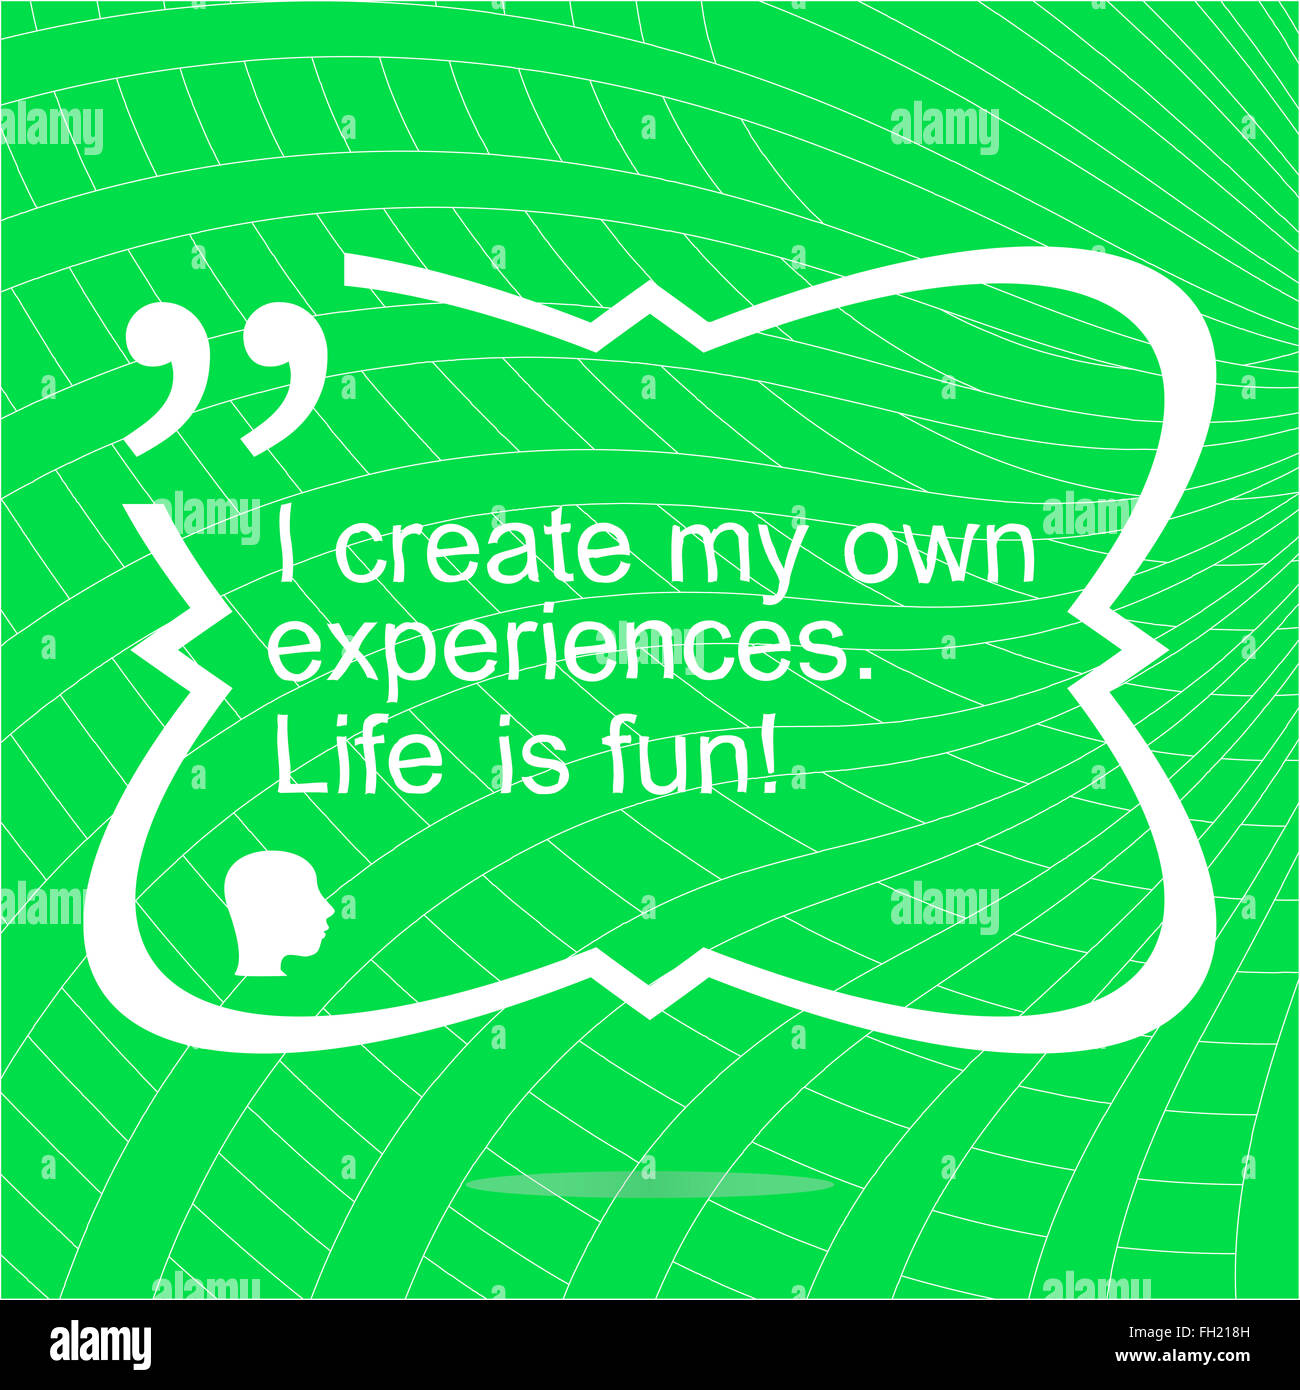 I create my own experiences. Life is fun. Inspirational motivational quote. Simple trendy design. Positive quote Stock Photo